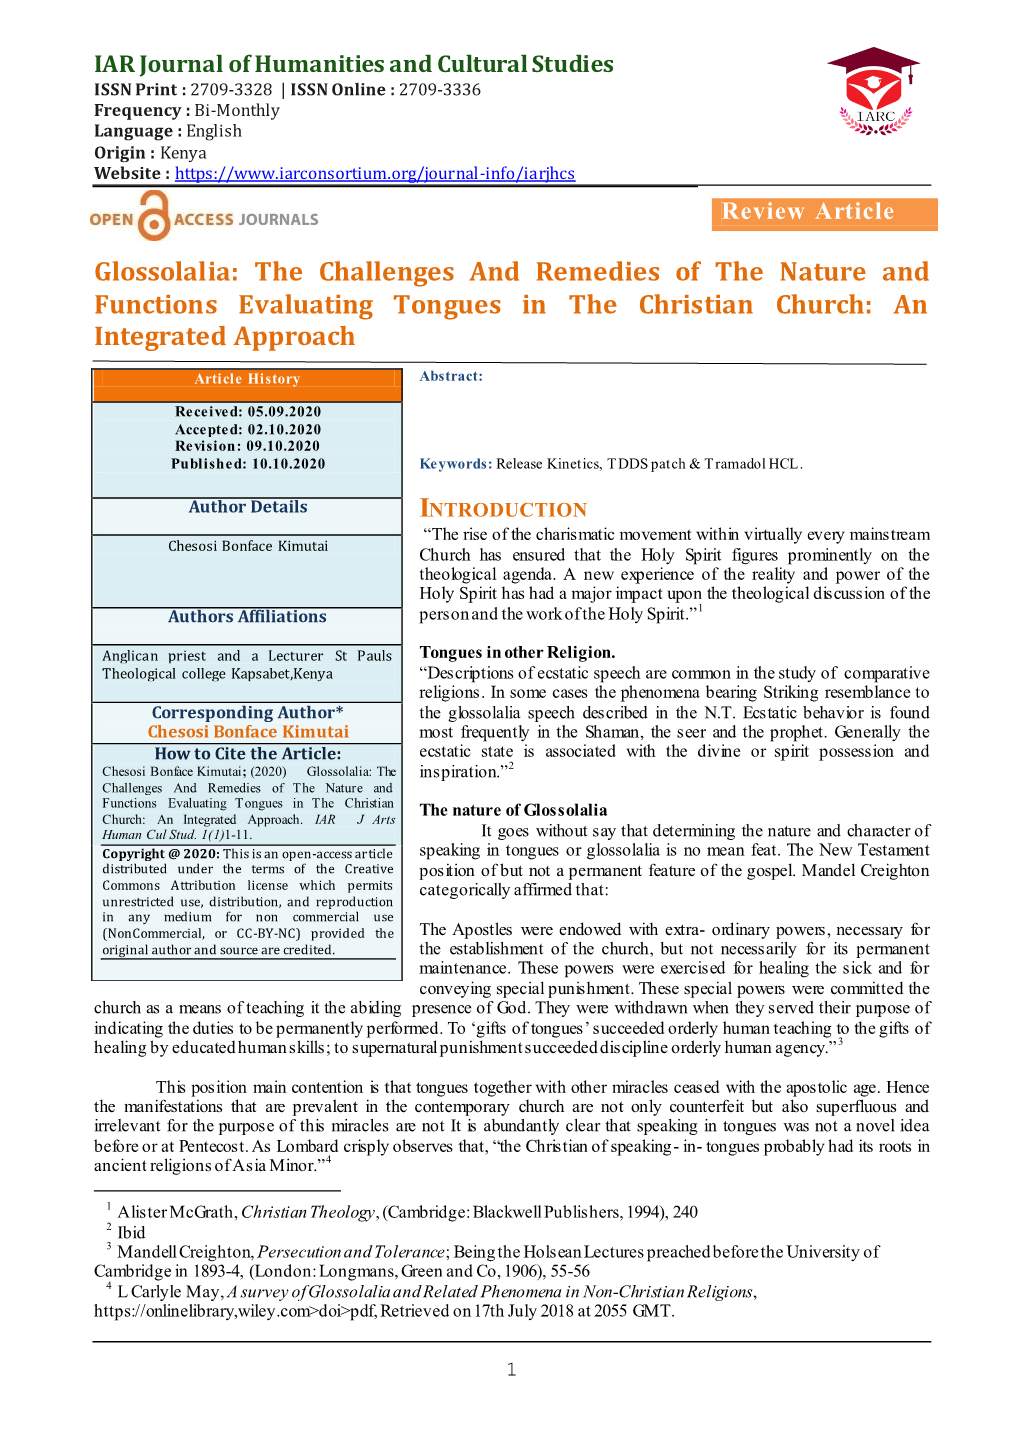 Glossolalia: the Challenges and Remedies of the Nature and Functions Evaluating Tongues in the Christian Church: an Integrated Approach